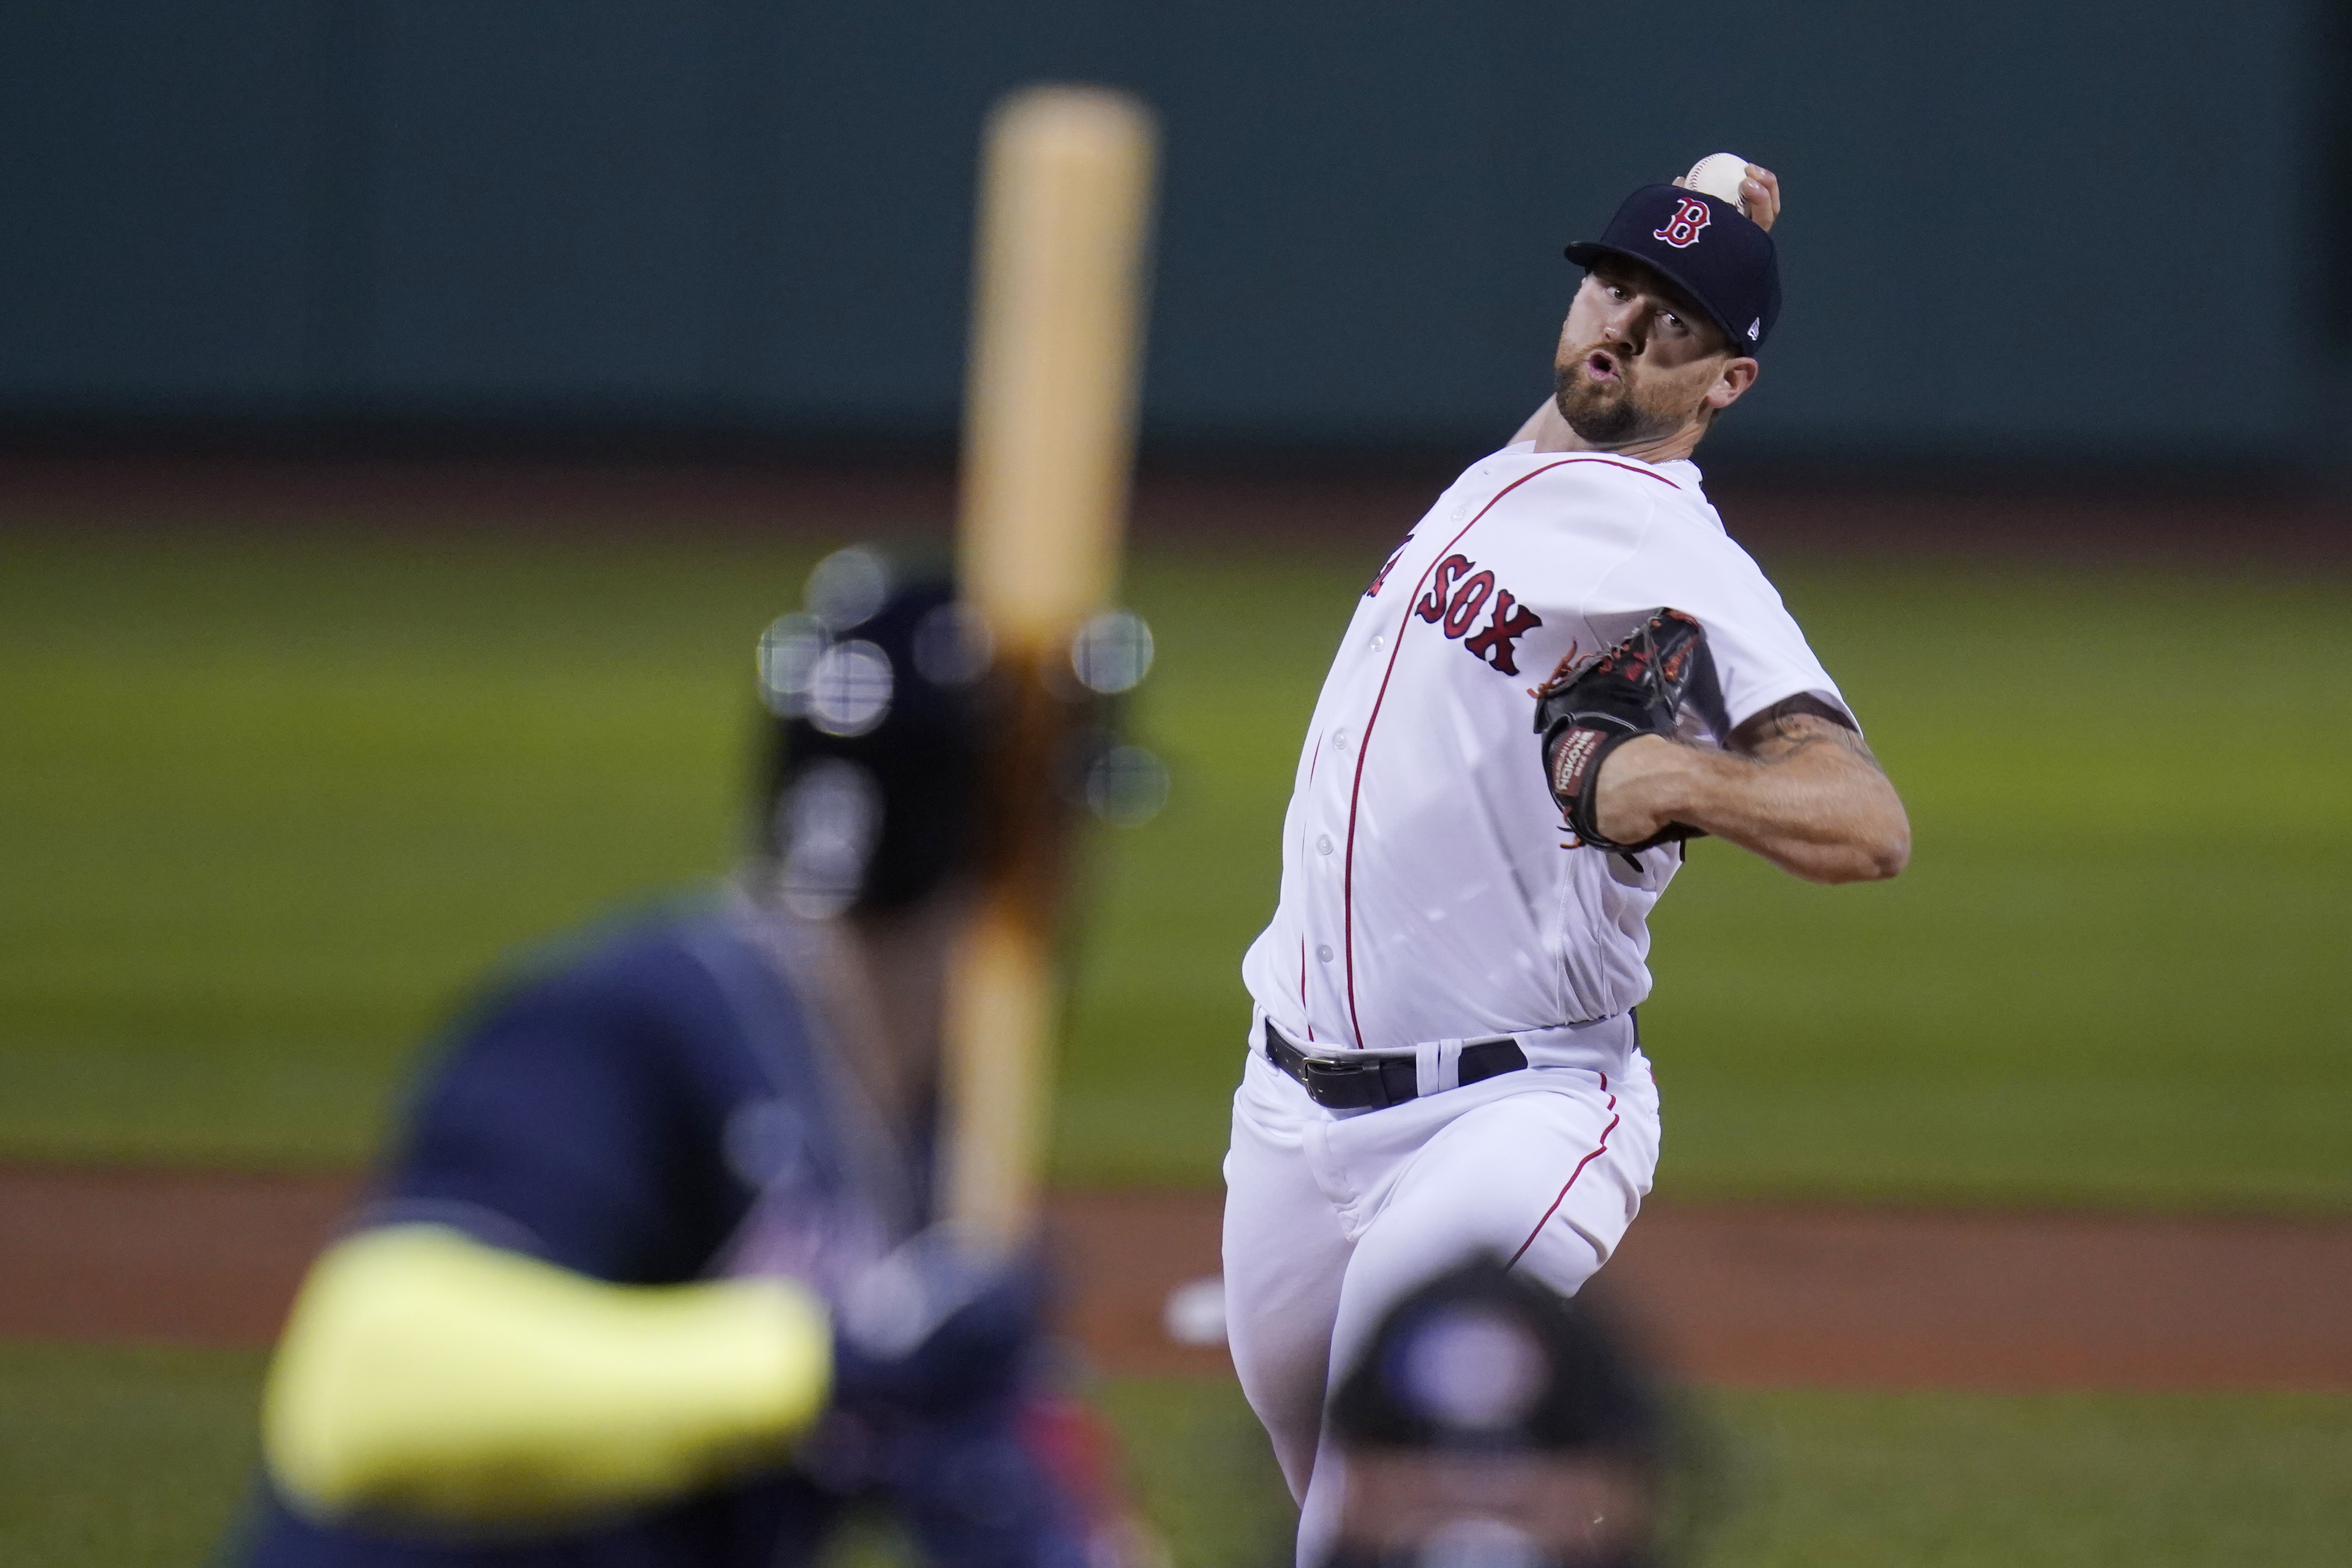 Kevin Youkilis trade could come soon, as Boston Red Sox shop 3B